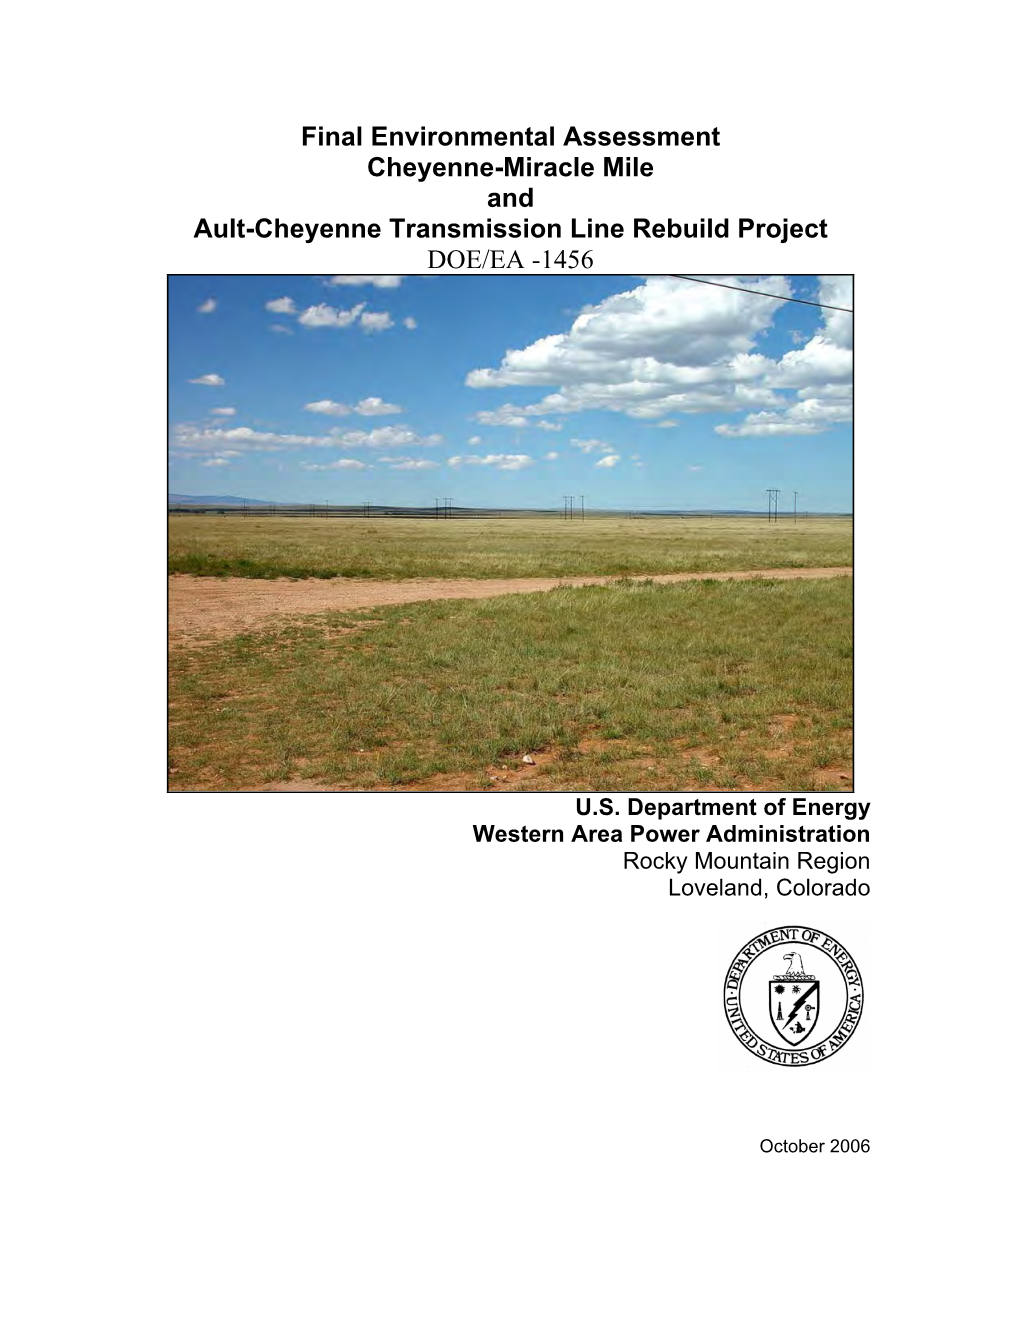 Final Environmental Assessment for the Cheyenne-Miracle Mile and Ault